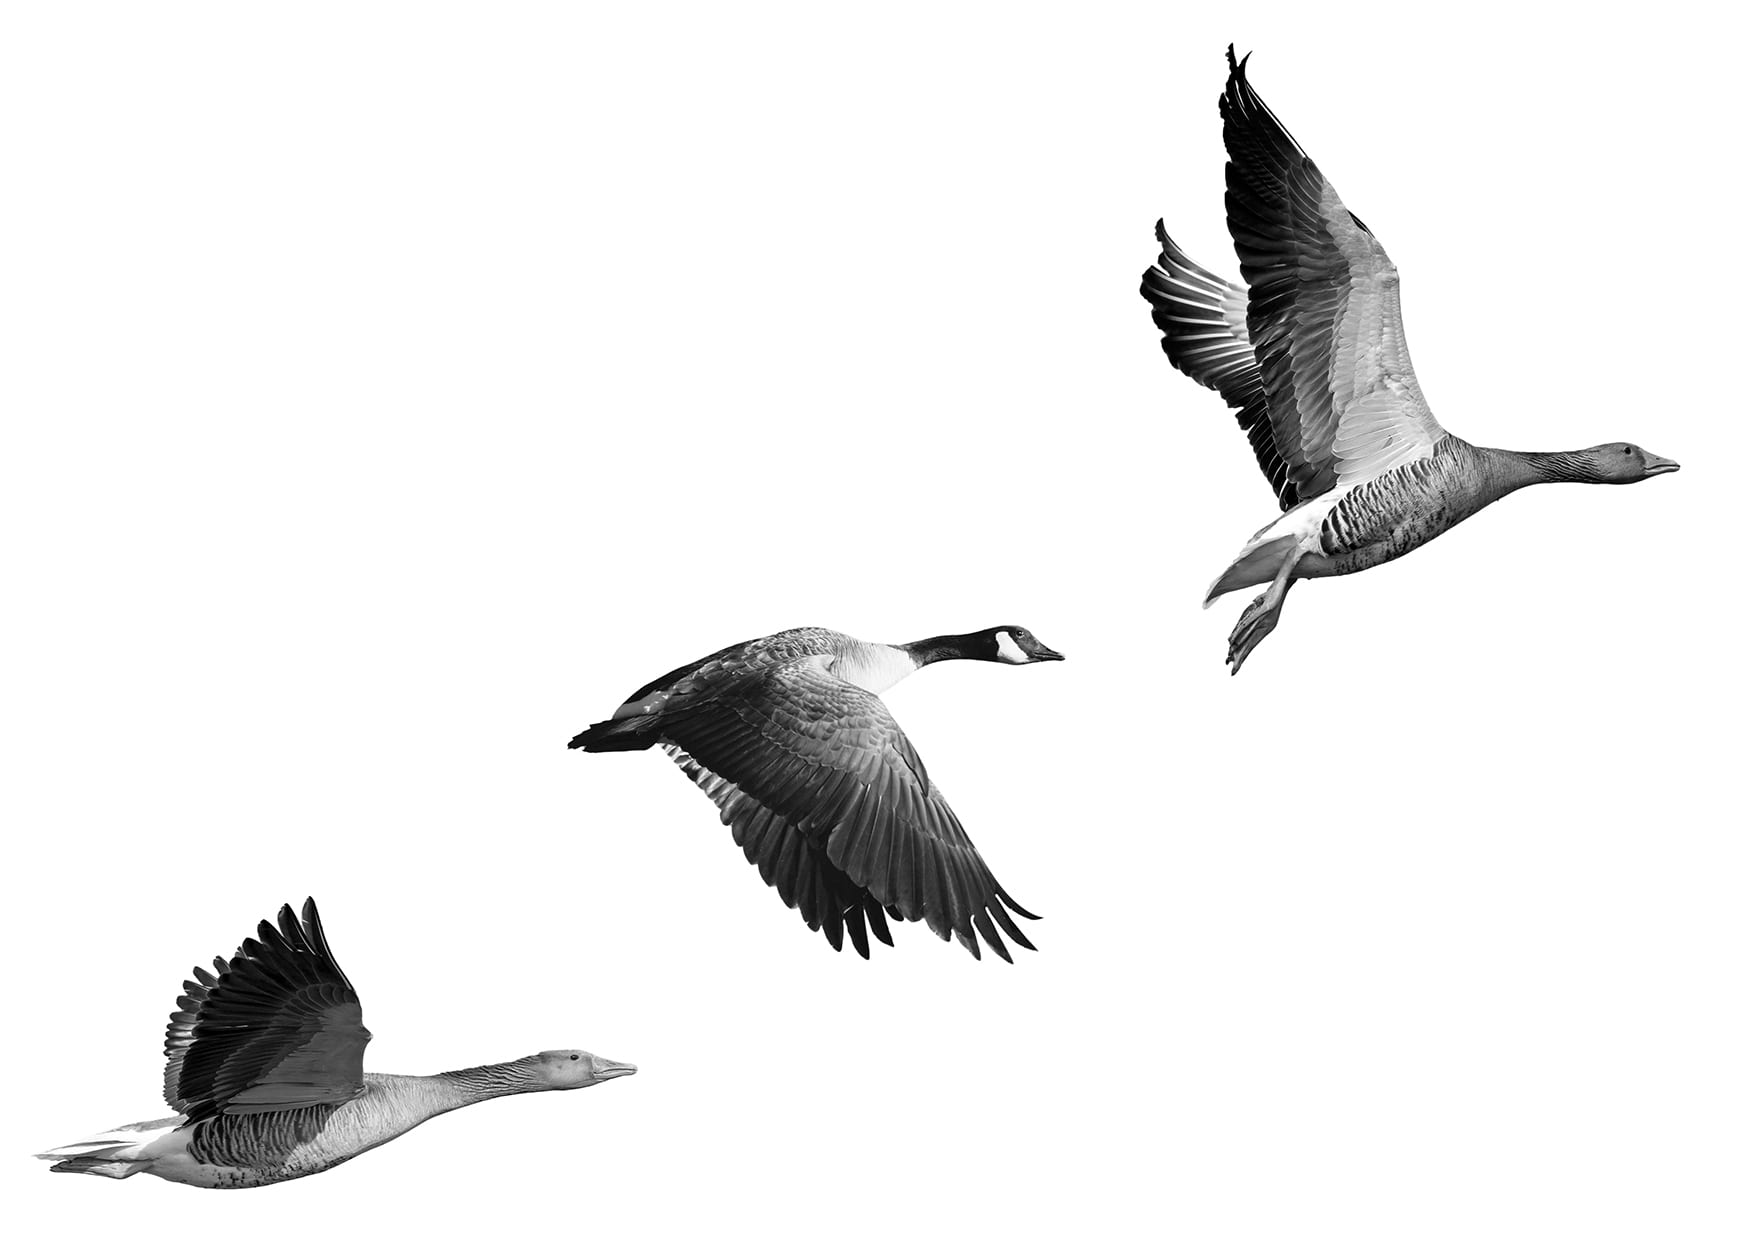 Three geese flying from left to right across the image